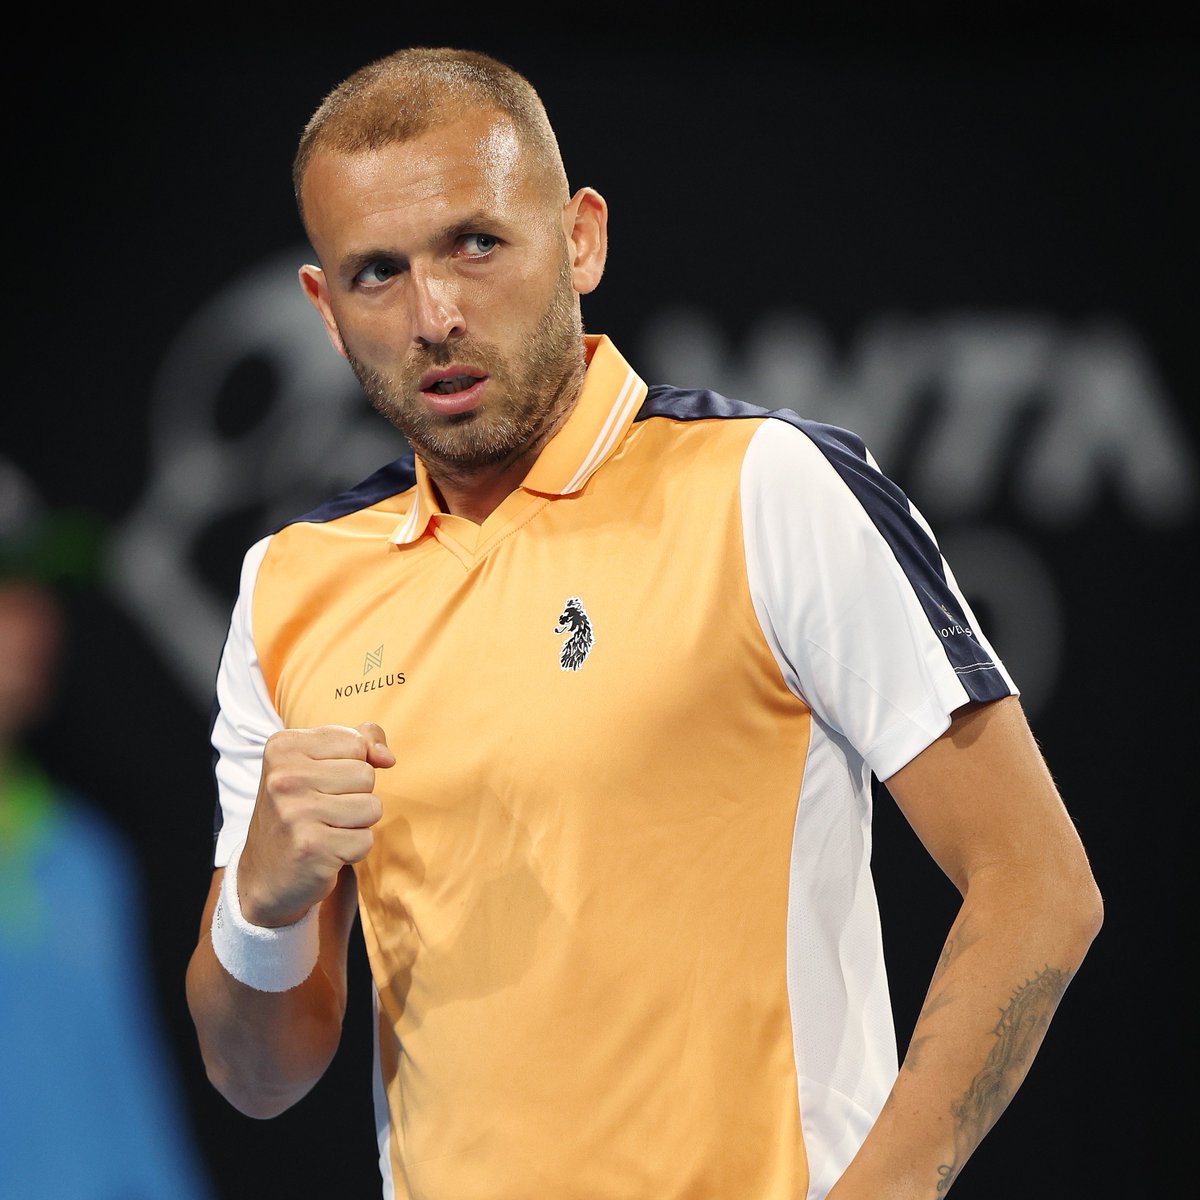 Dan Evans makes a winning start at the @BNPPprimrose! 🙌 Dan defeated Hugo Grenier 6-4, 6-4 to progress to the last 16 in Bordeaux #BackTheBrits 🇬🇧